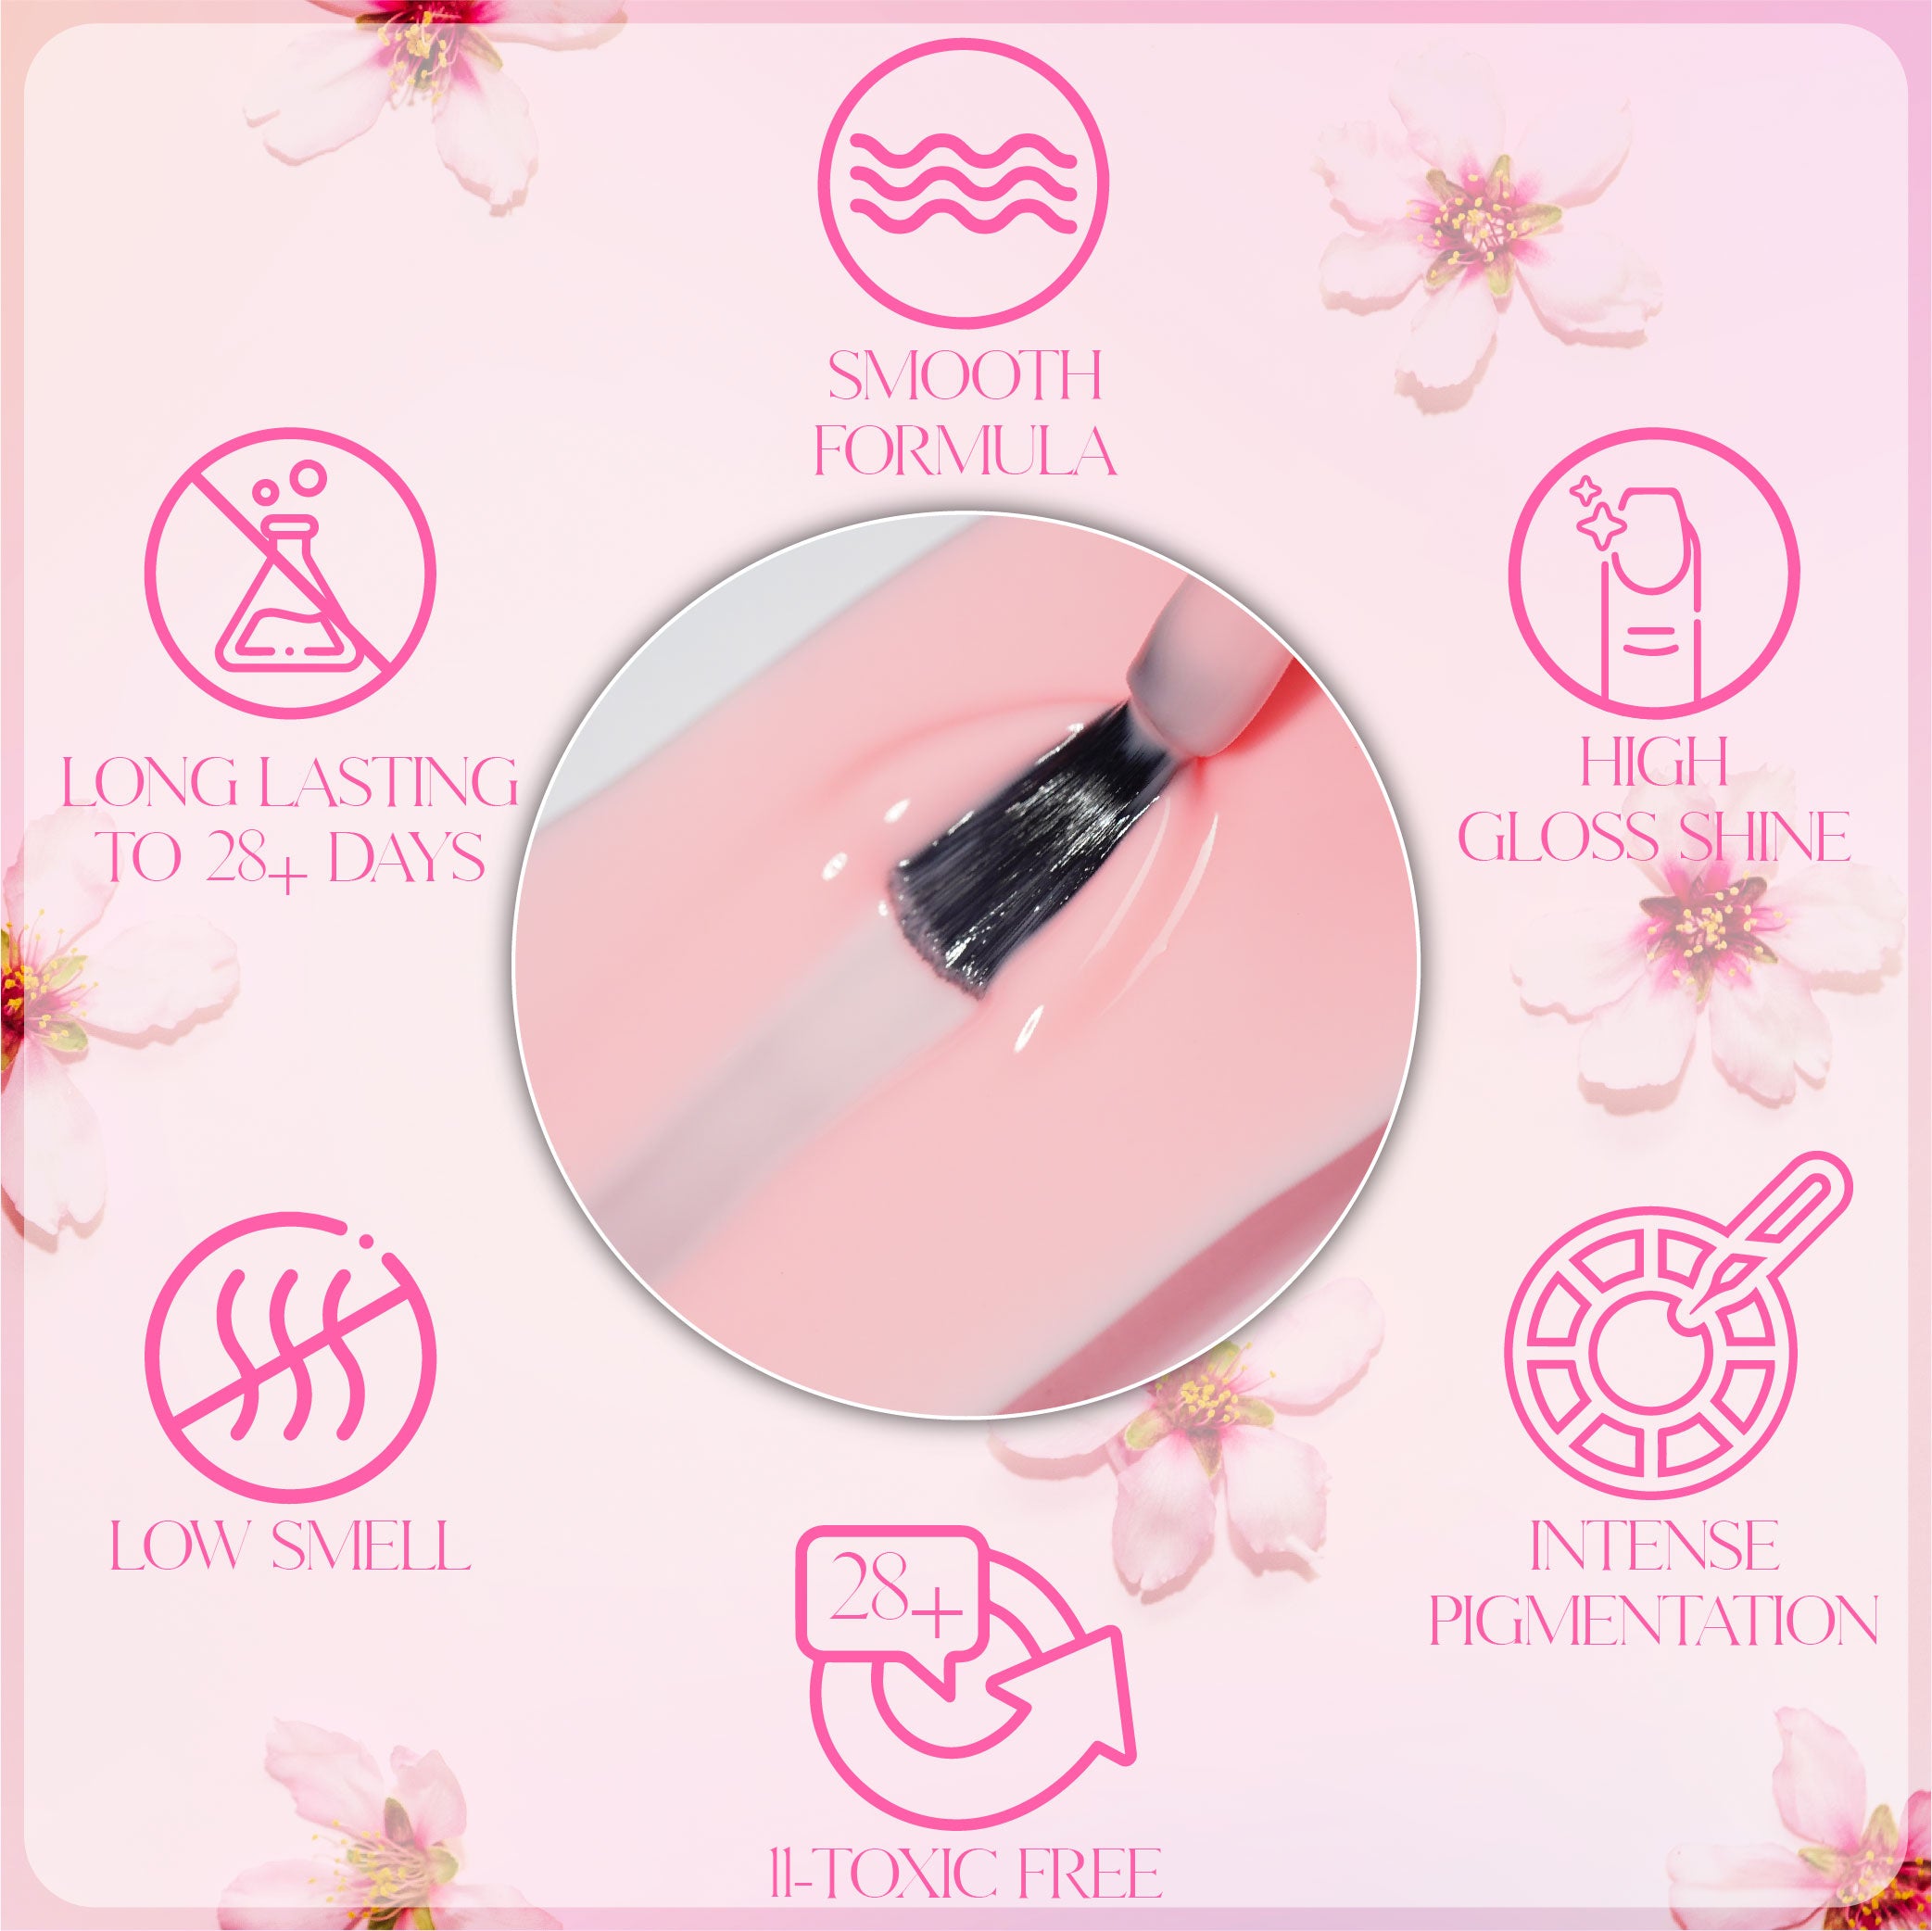 LDS PB - 07 - Blossom Pink Collection